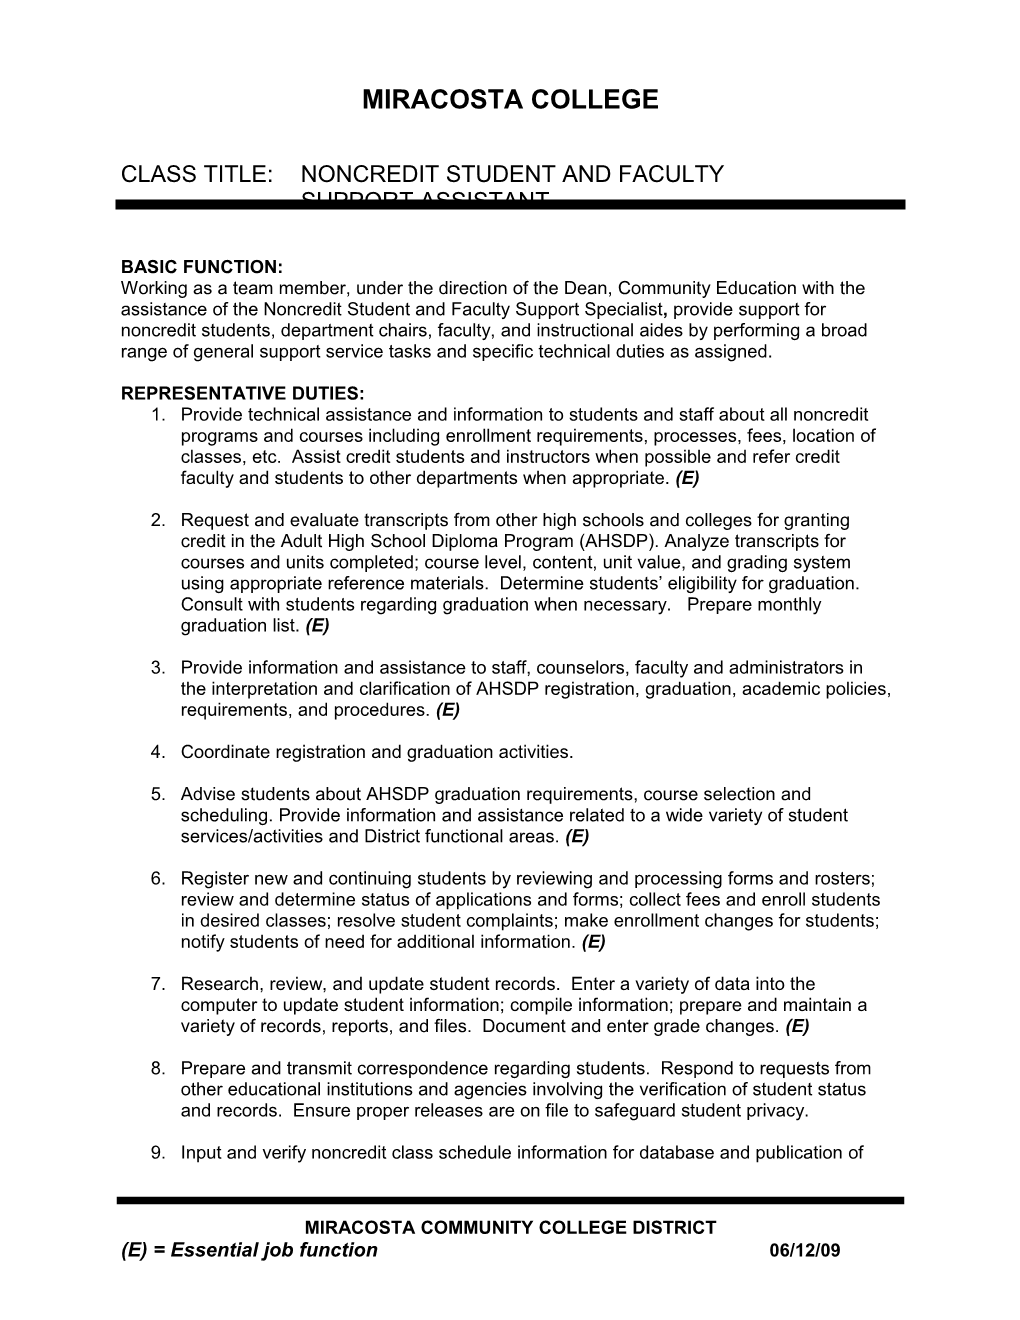 Noncredit Student and Faculty Support Assistant1